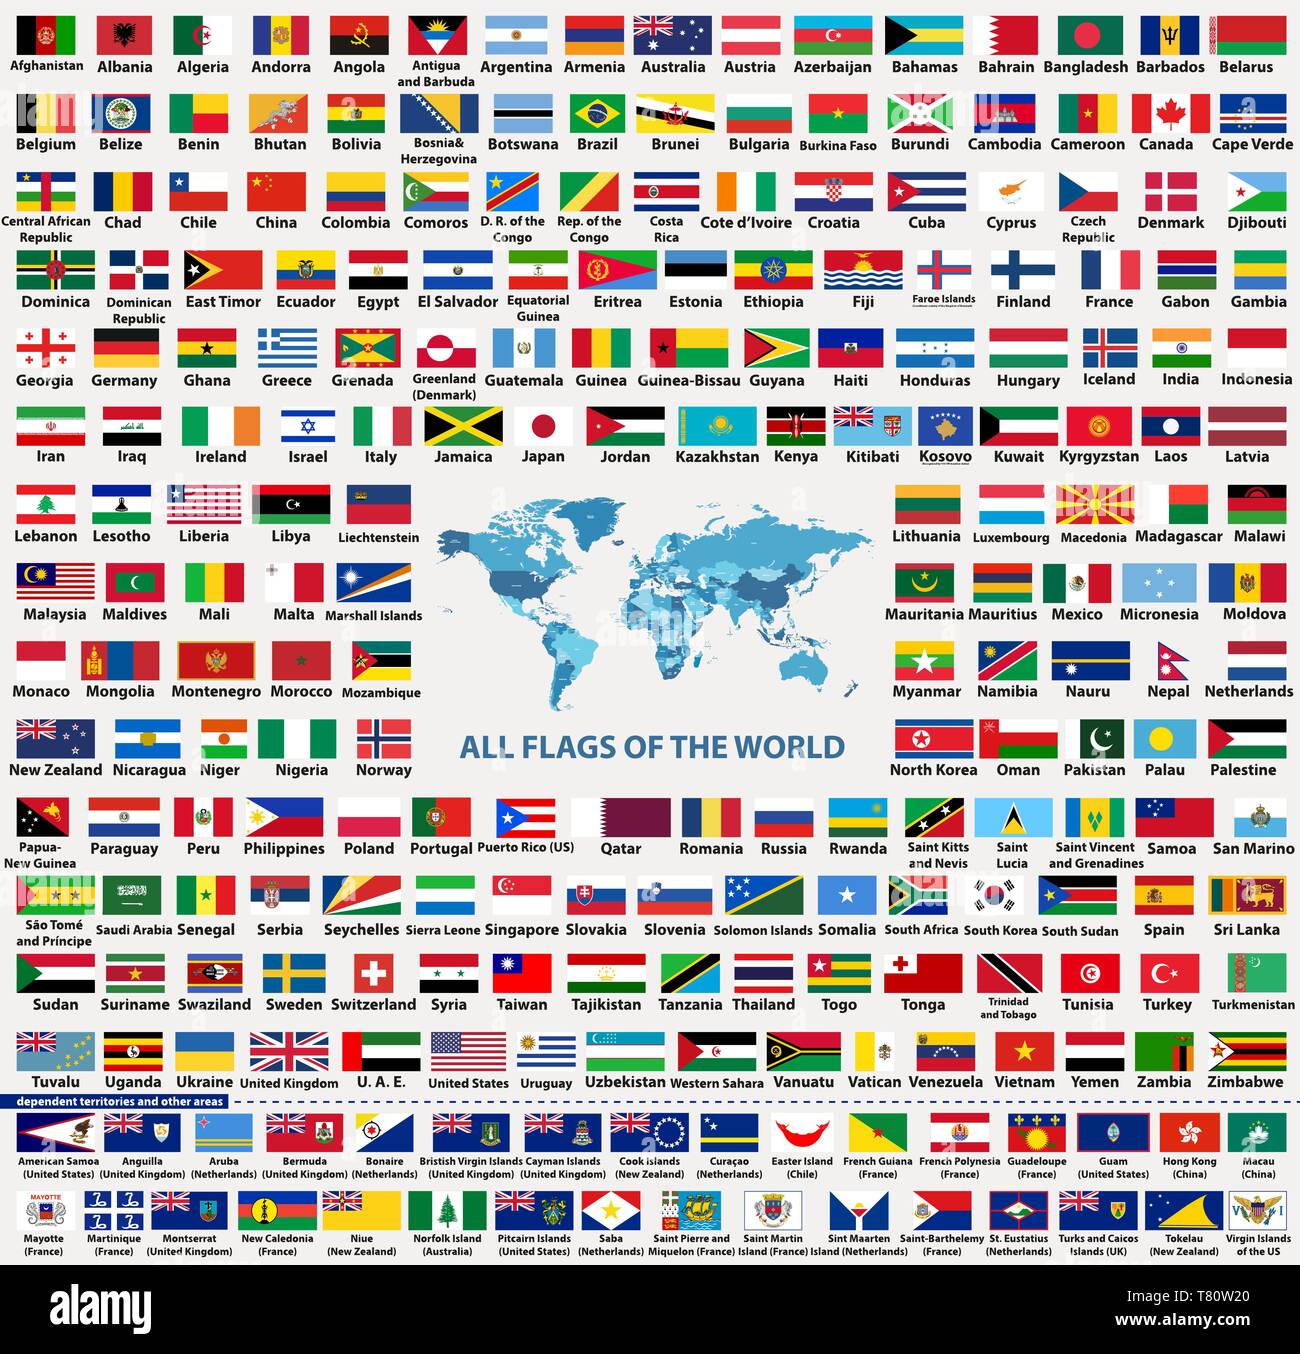 All Countries In The World